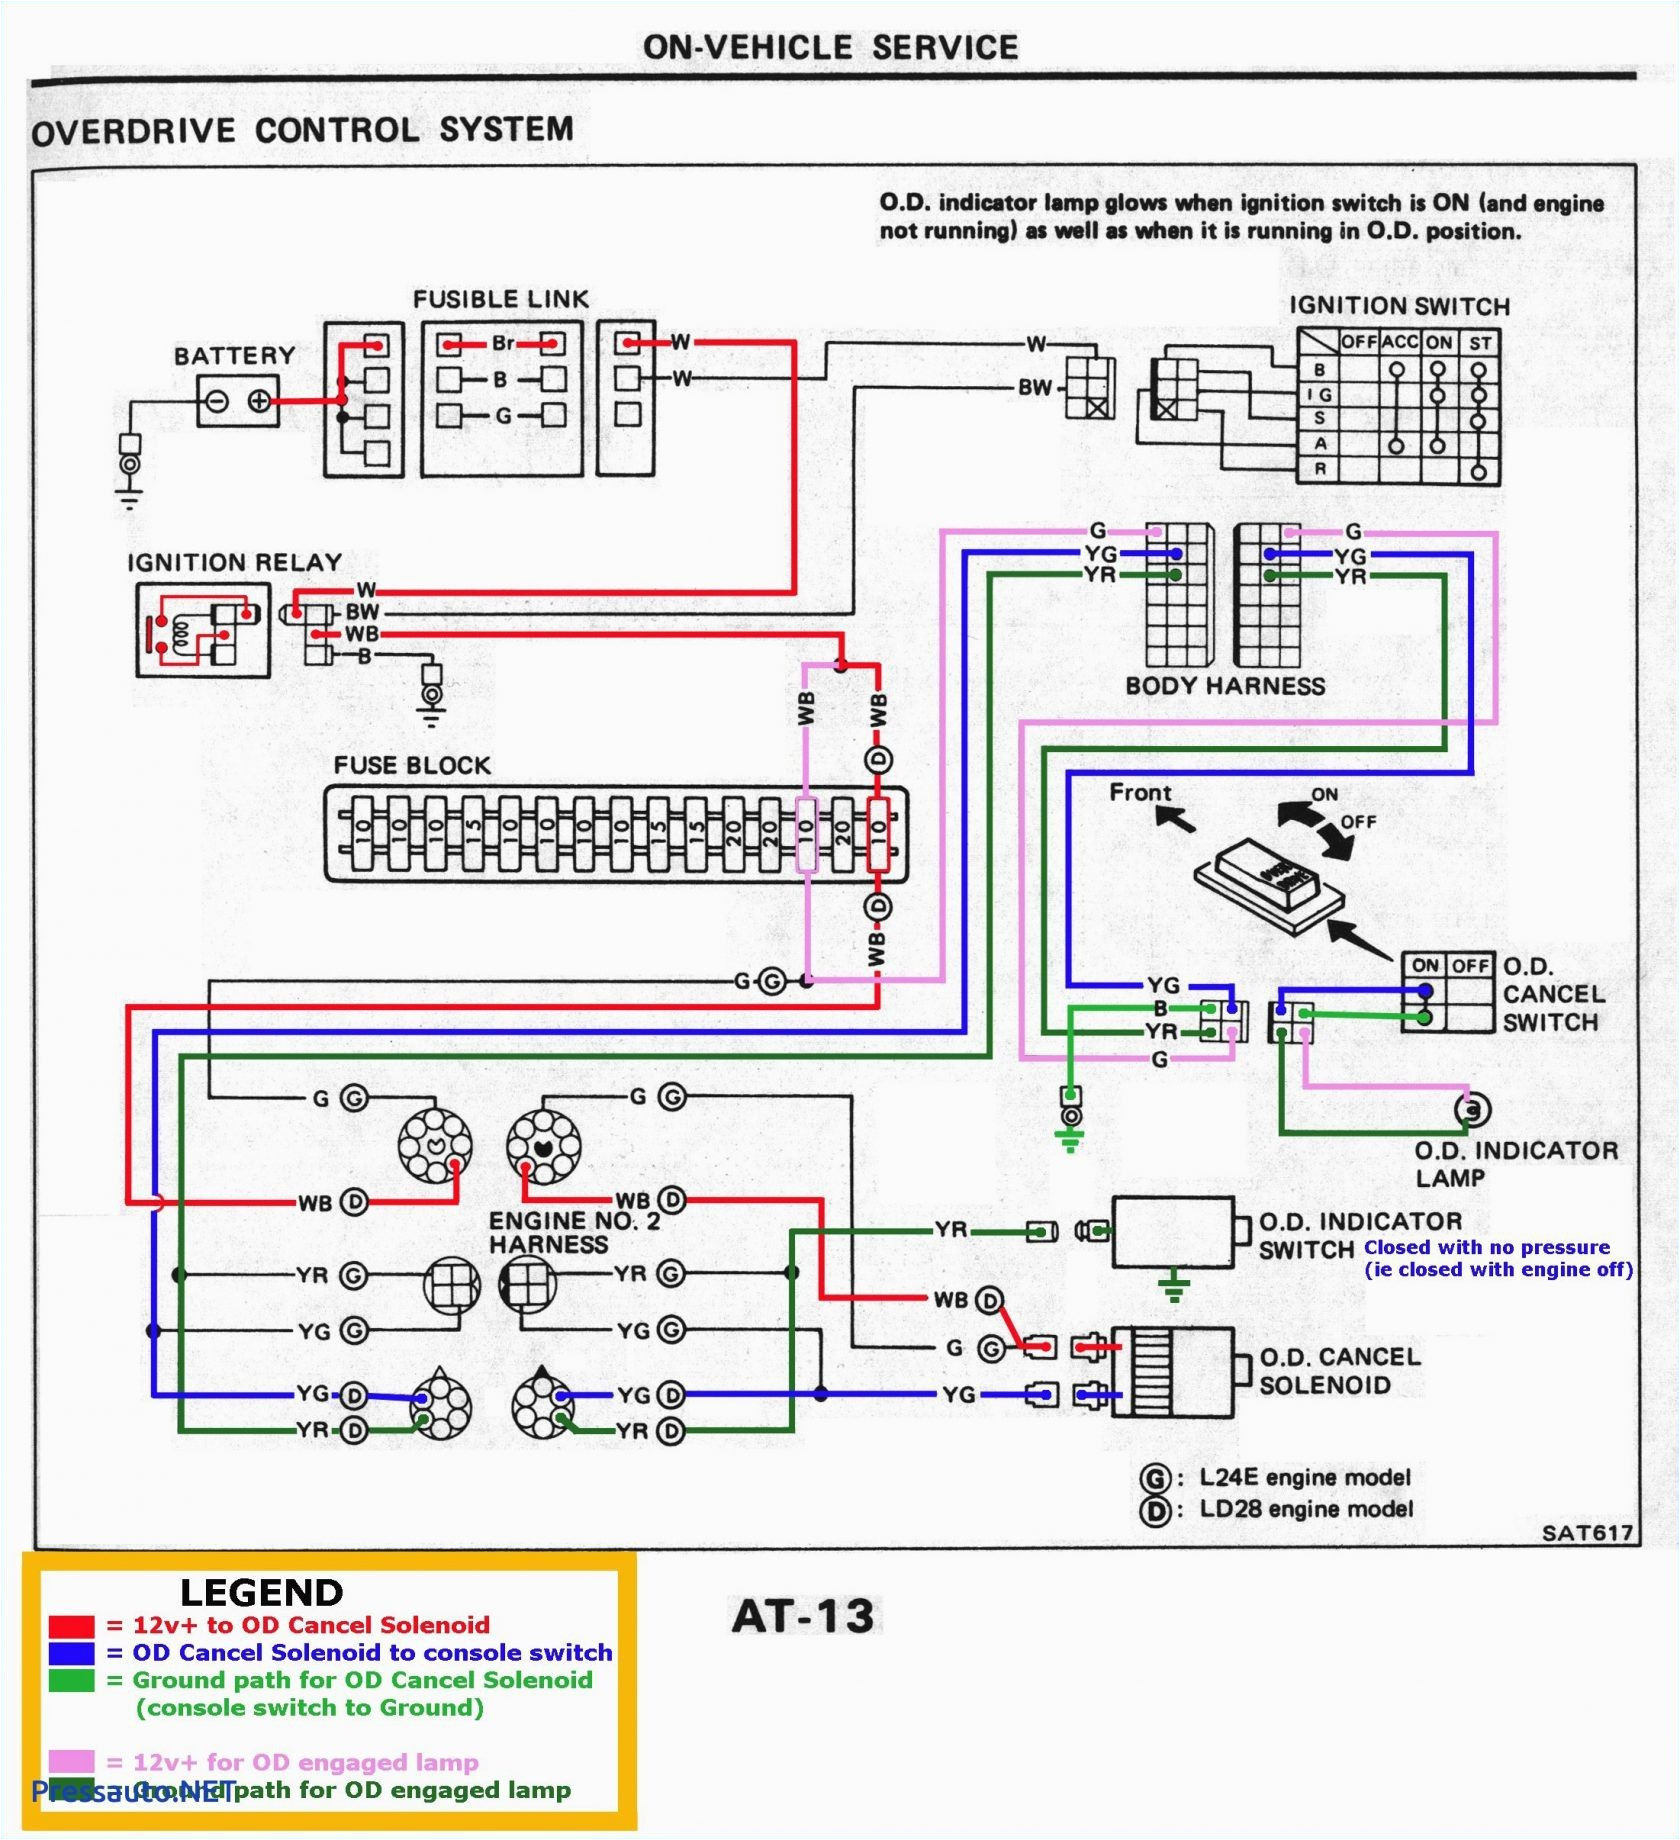 automotive ignition wiring harness wiring diagram blog automotive ignition switches wiring harnesses and controllers